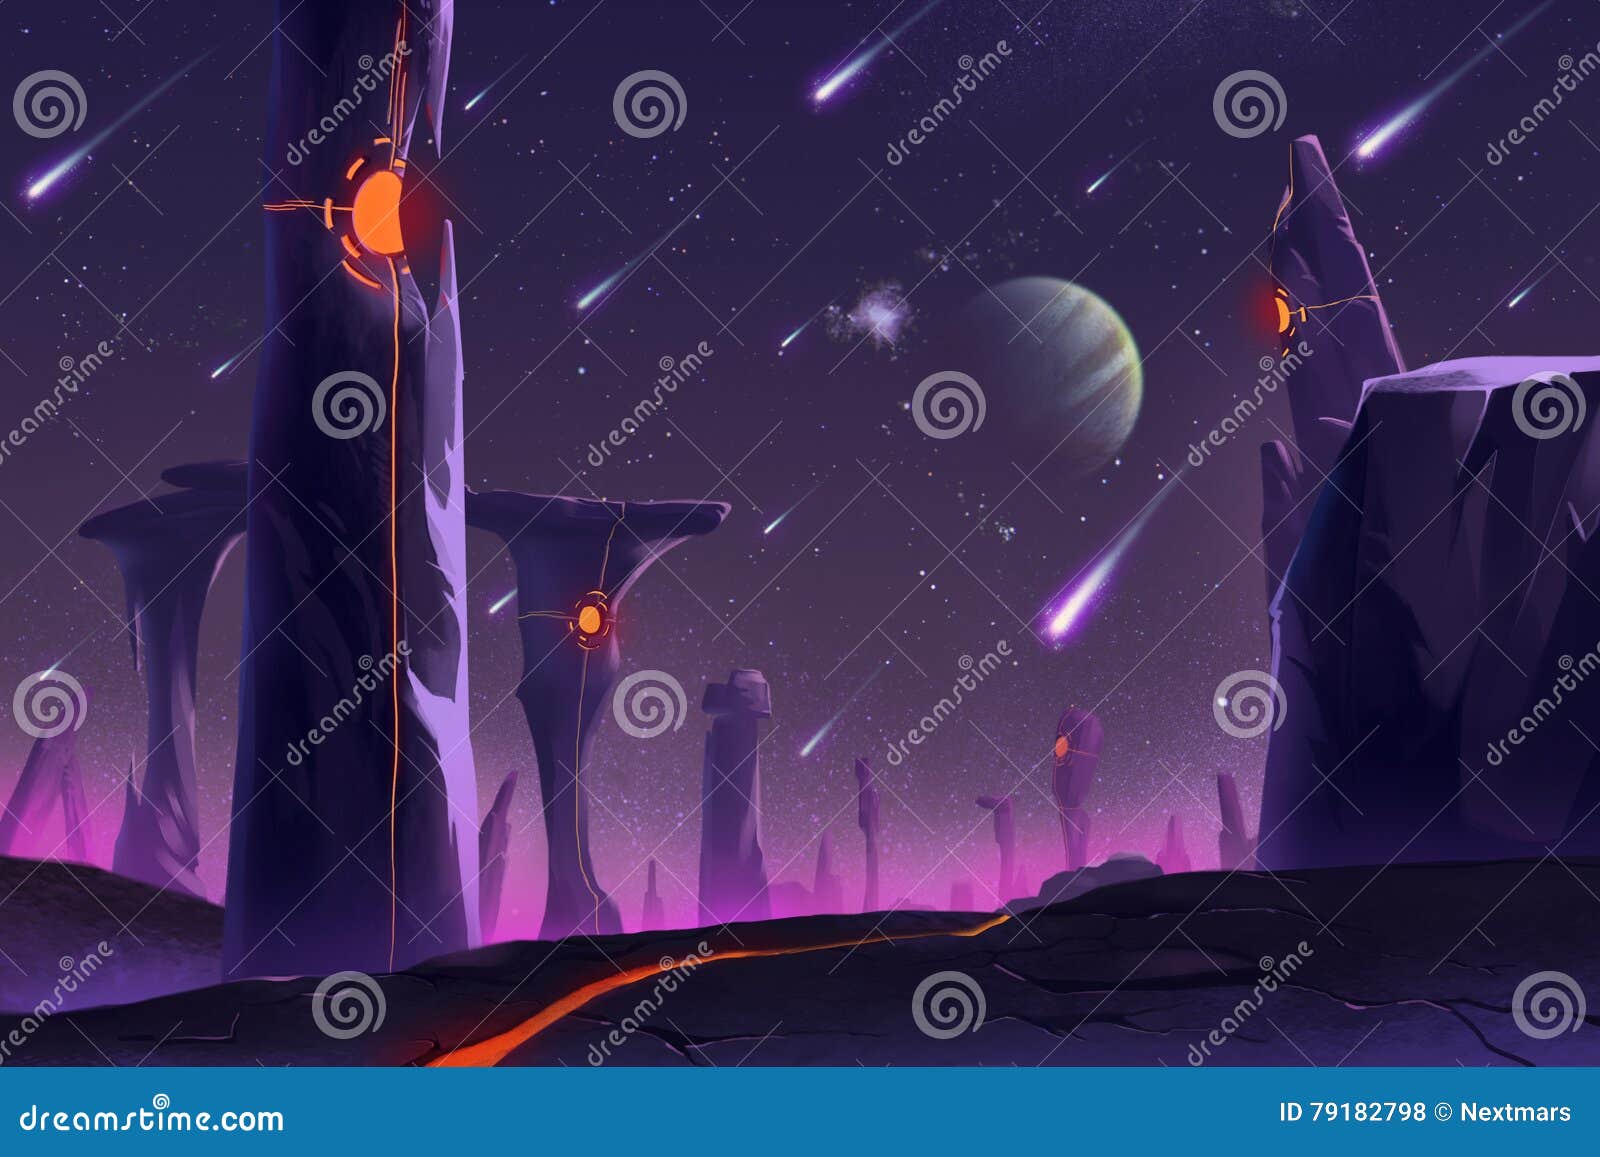 fantastic and exotic allen planets environment: stonehenge